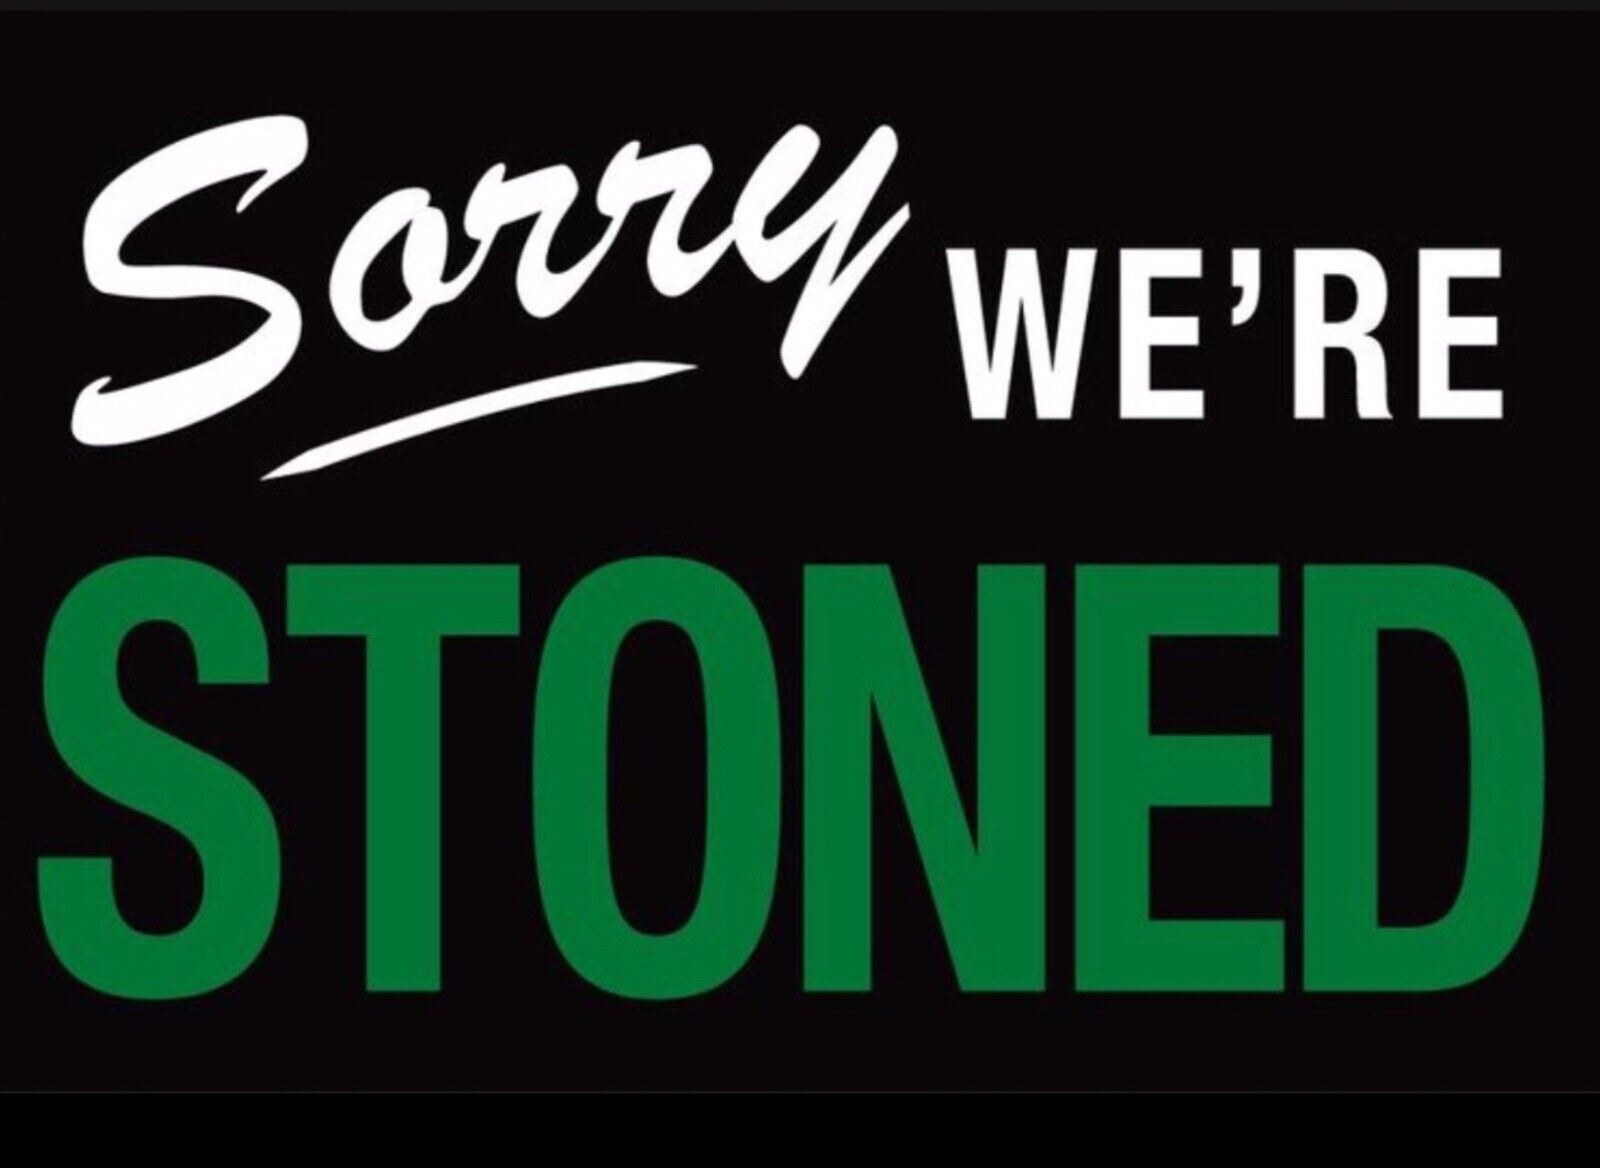 Sorry We’re Stoned on a 3.5” X 2.5” Refrigerator Magnet